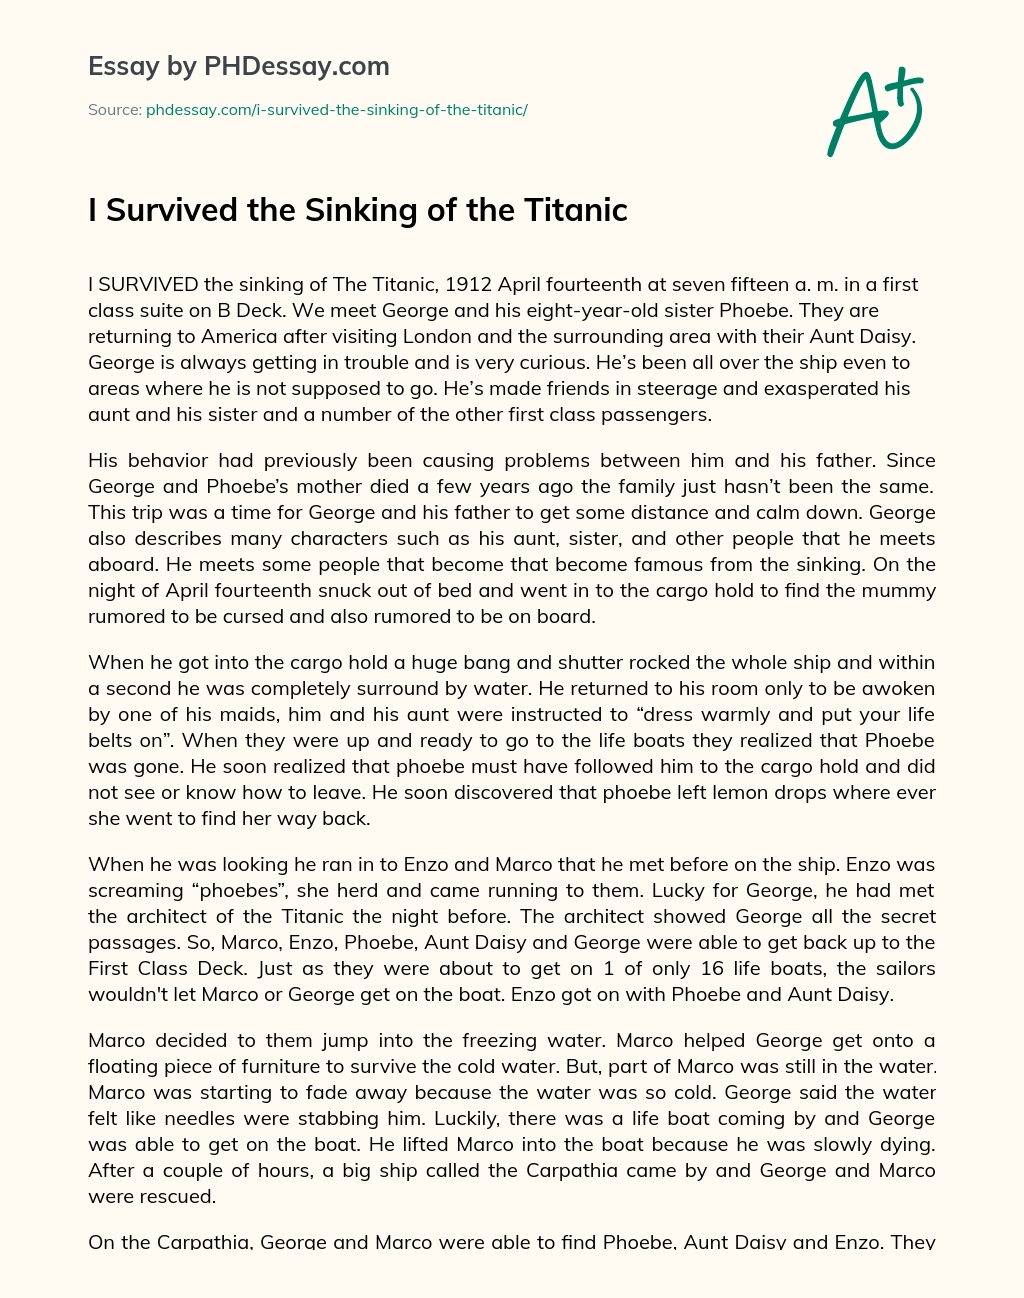 the sinking of the titanic essay